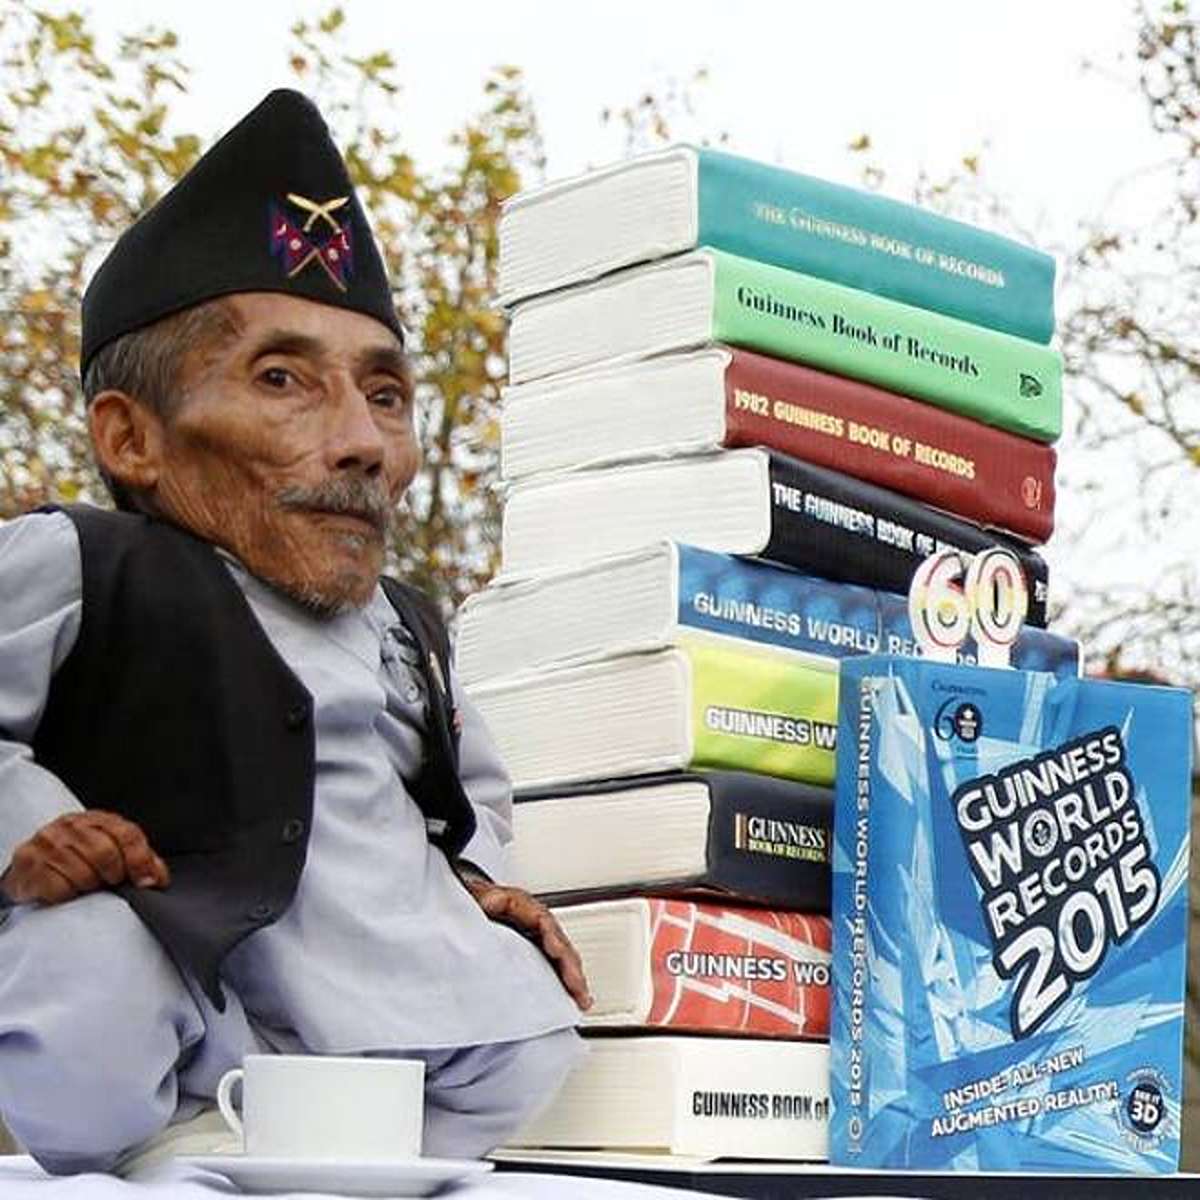 This is Chandra Bahadur, the shortest man in recorded history:He stood just 21.5 inches tall.